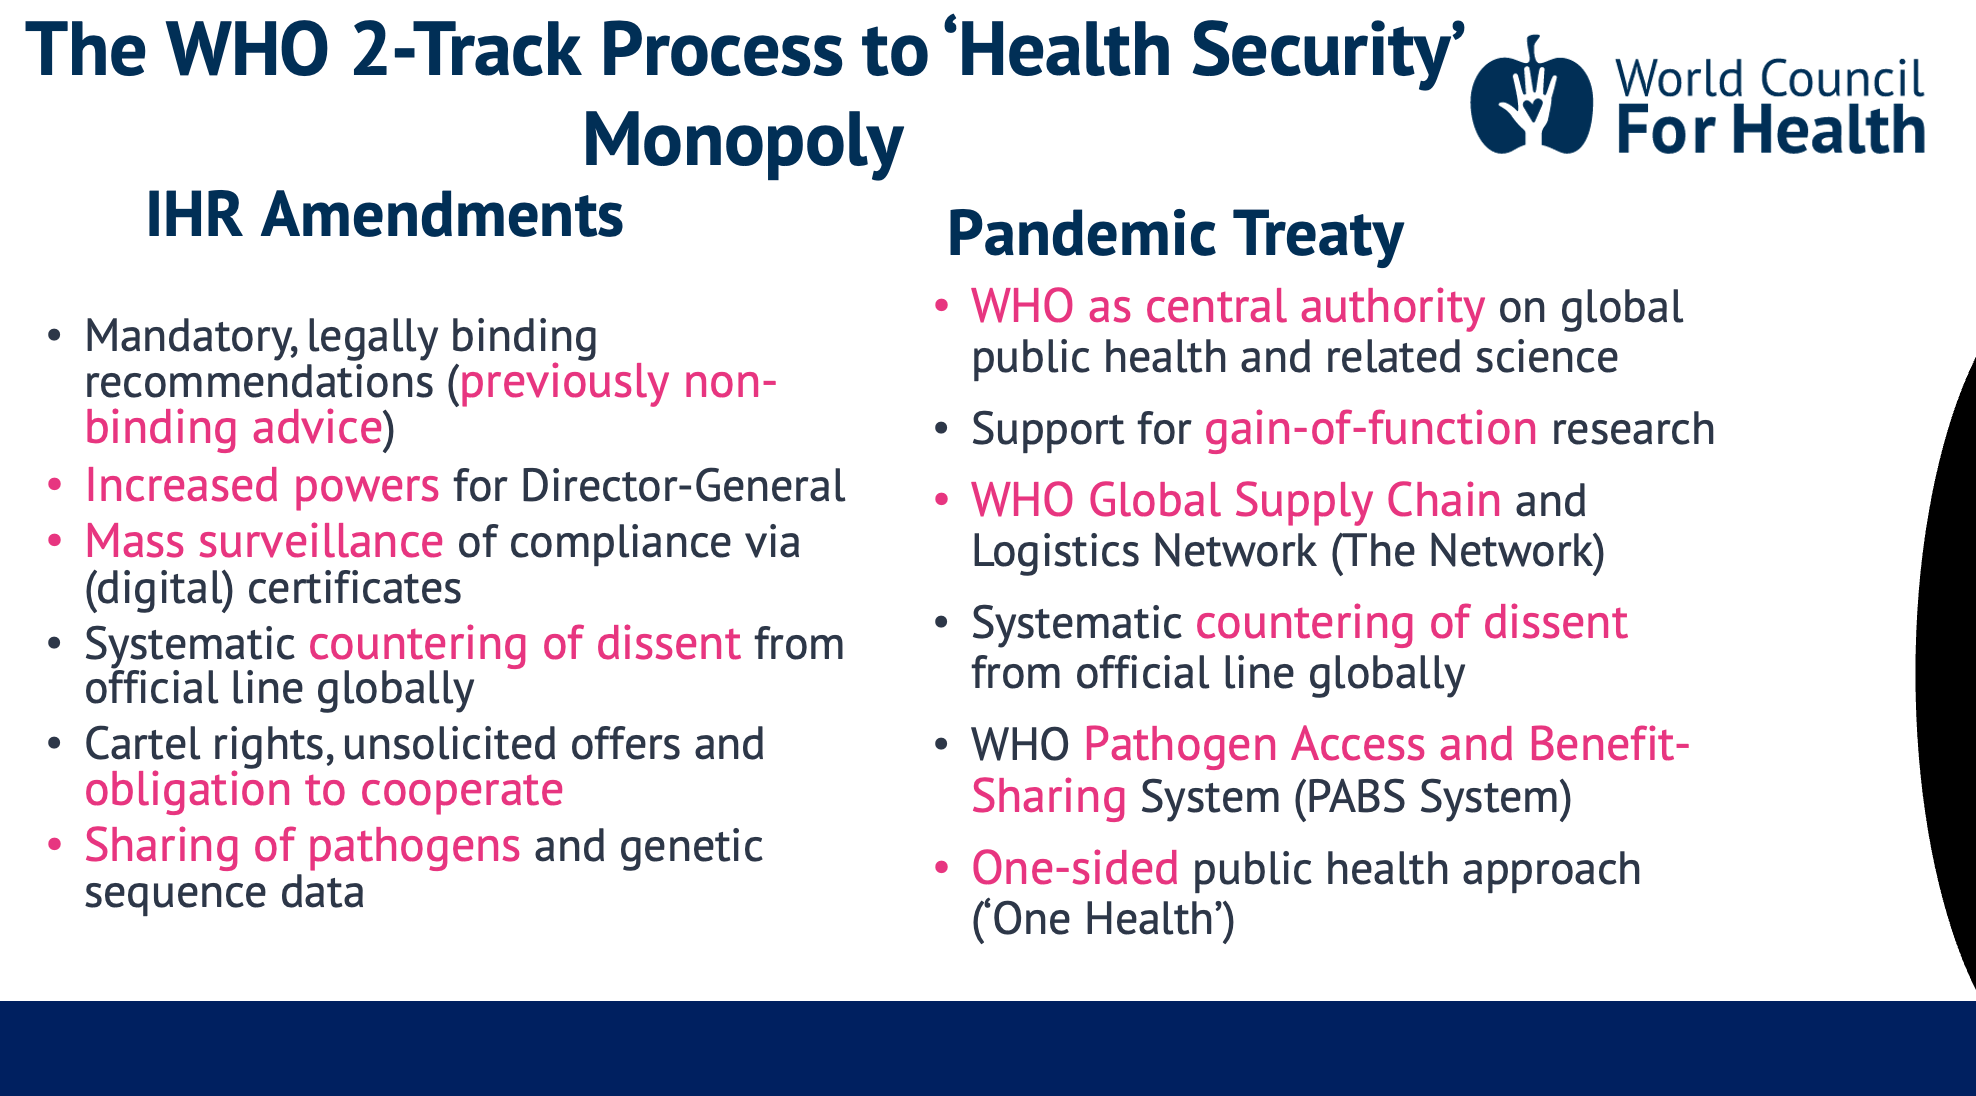 Two stage process for WHO world takeover via 'Health Security'